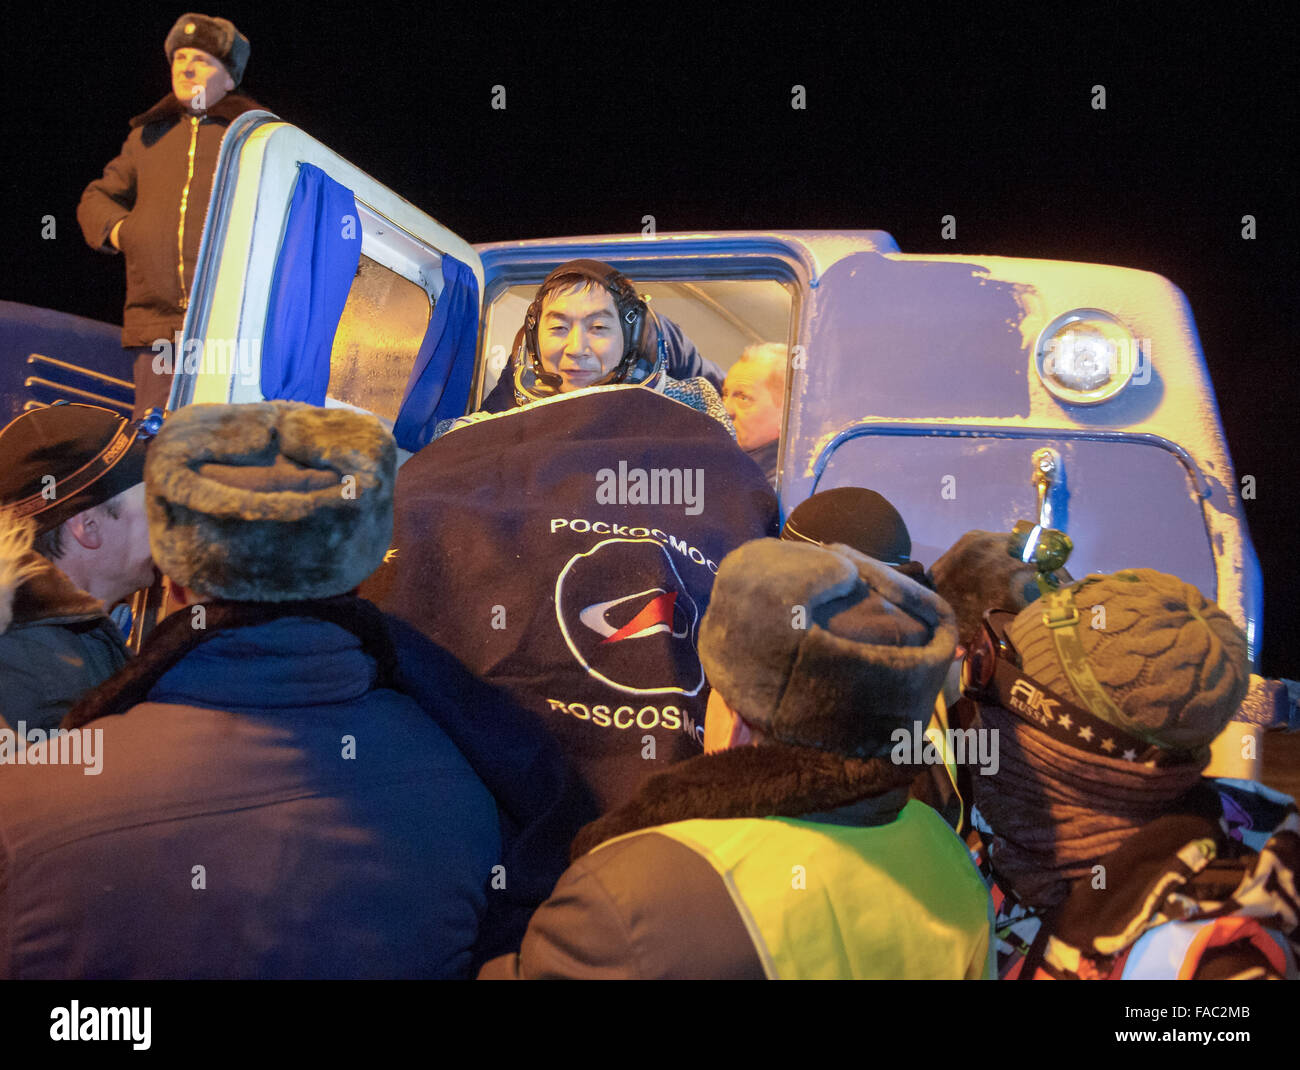 International Space Station Expedition 45 crew member Japanese astronaut Kimya Yui of the Japan Aerospace Exploration Agency is loaded on the All Terrain Recovery Vehicle moments after landing in a remote area in the Soyuz TMA-17M spacecraft December 11, 2015 near Zhezkazgan, Kazakhstan. The crew is returning after 141 days onboard the International Space Station. Stock Photo